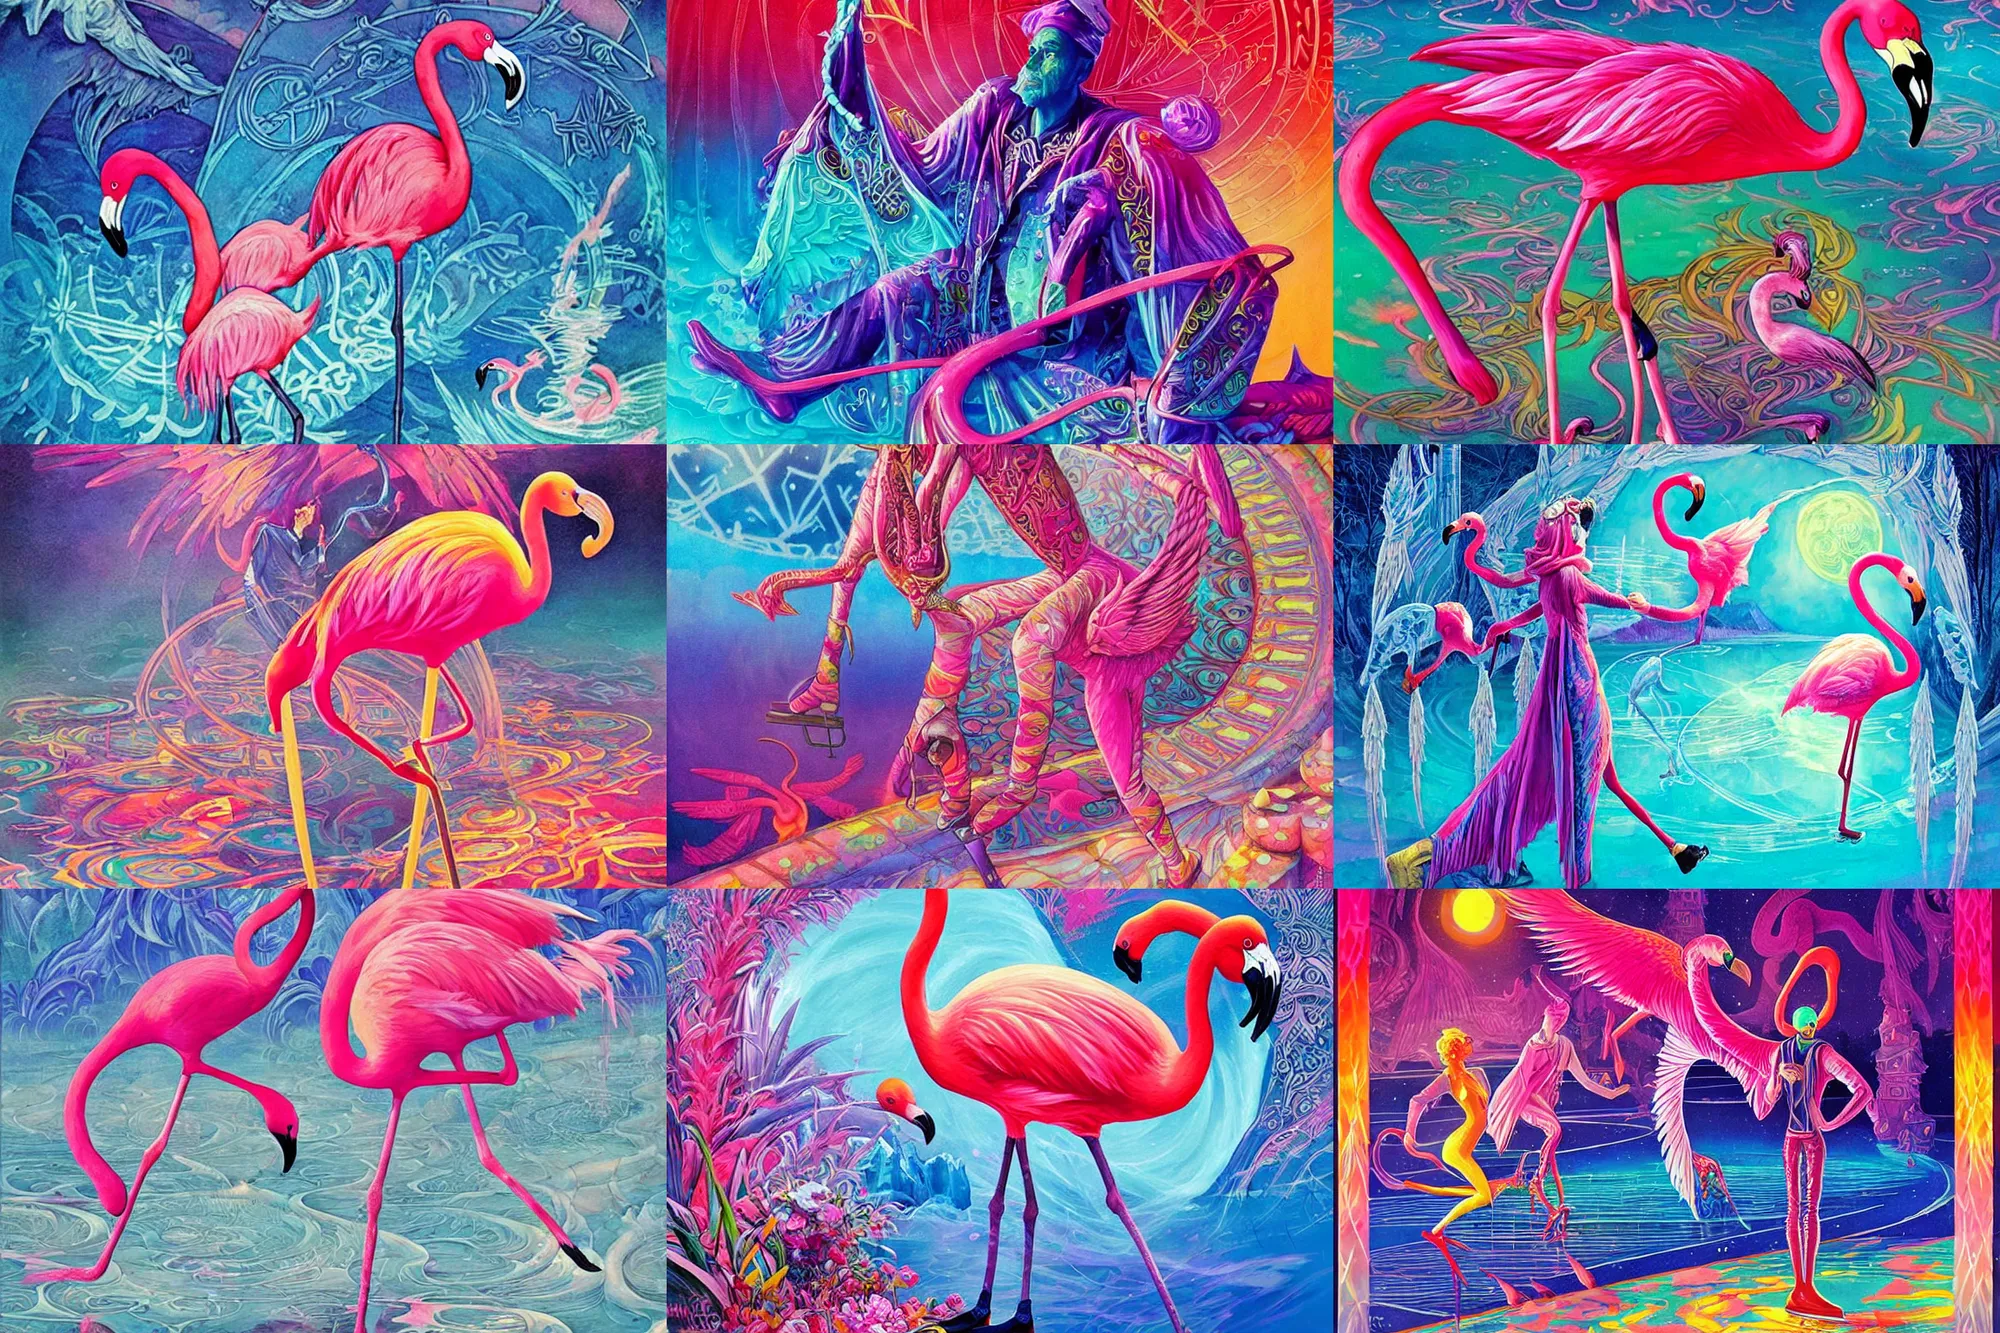 Prompt: The grand alchemist id a flamingo-man, he likes ice-skating. Gorgeous and with flair, a fantasy sci-fi dreamworld painting in neon geometric inks, art nouveau by Terese Edvard Guay Kinkade